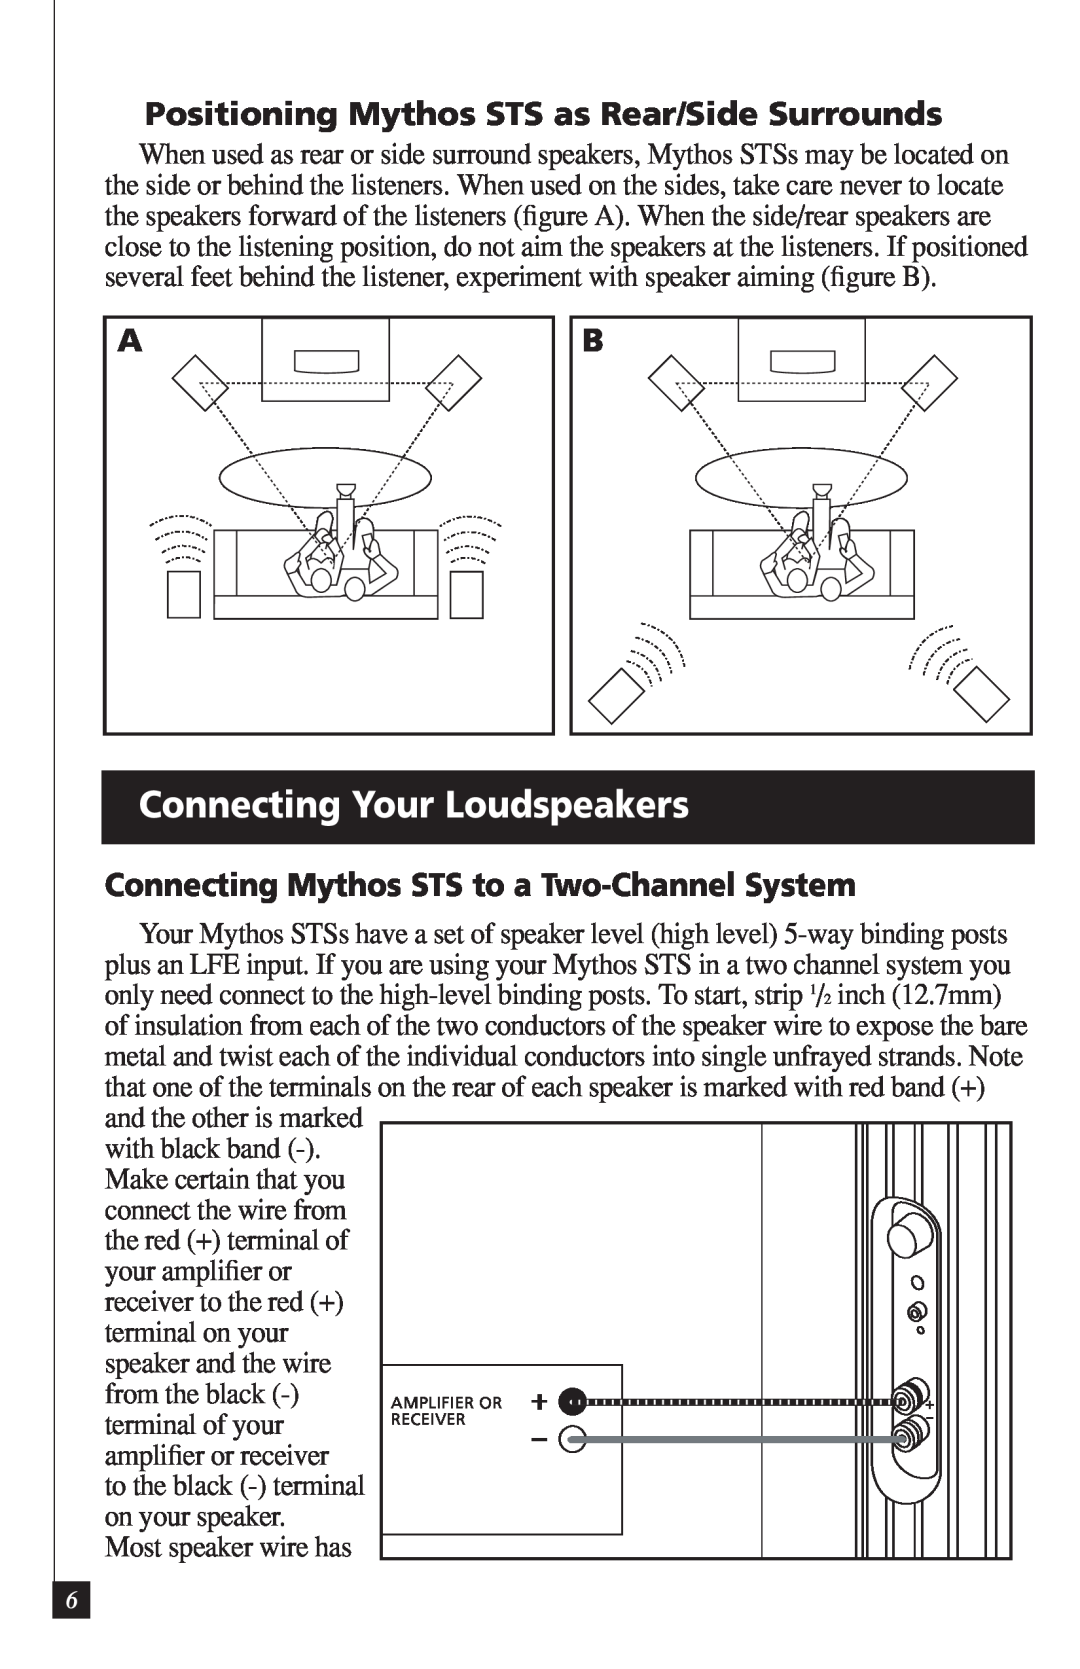 Definitive Technology VEIB owner manual Connecting Your Loudspeakers, Positioning Mythos STS as Rear/Side Surrounds 